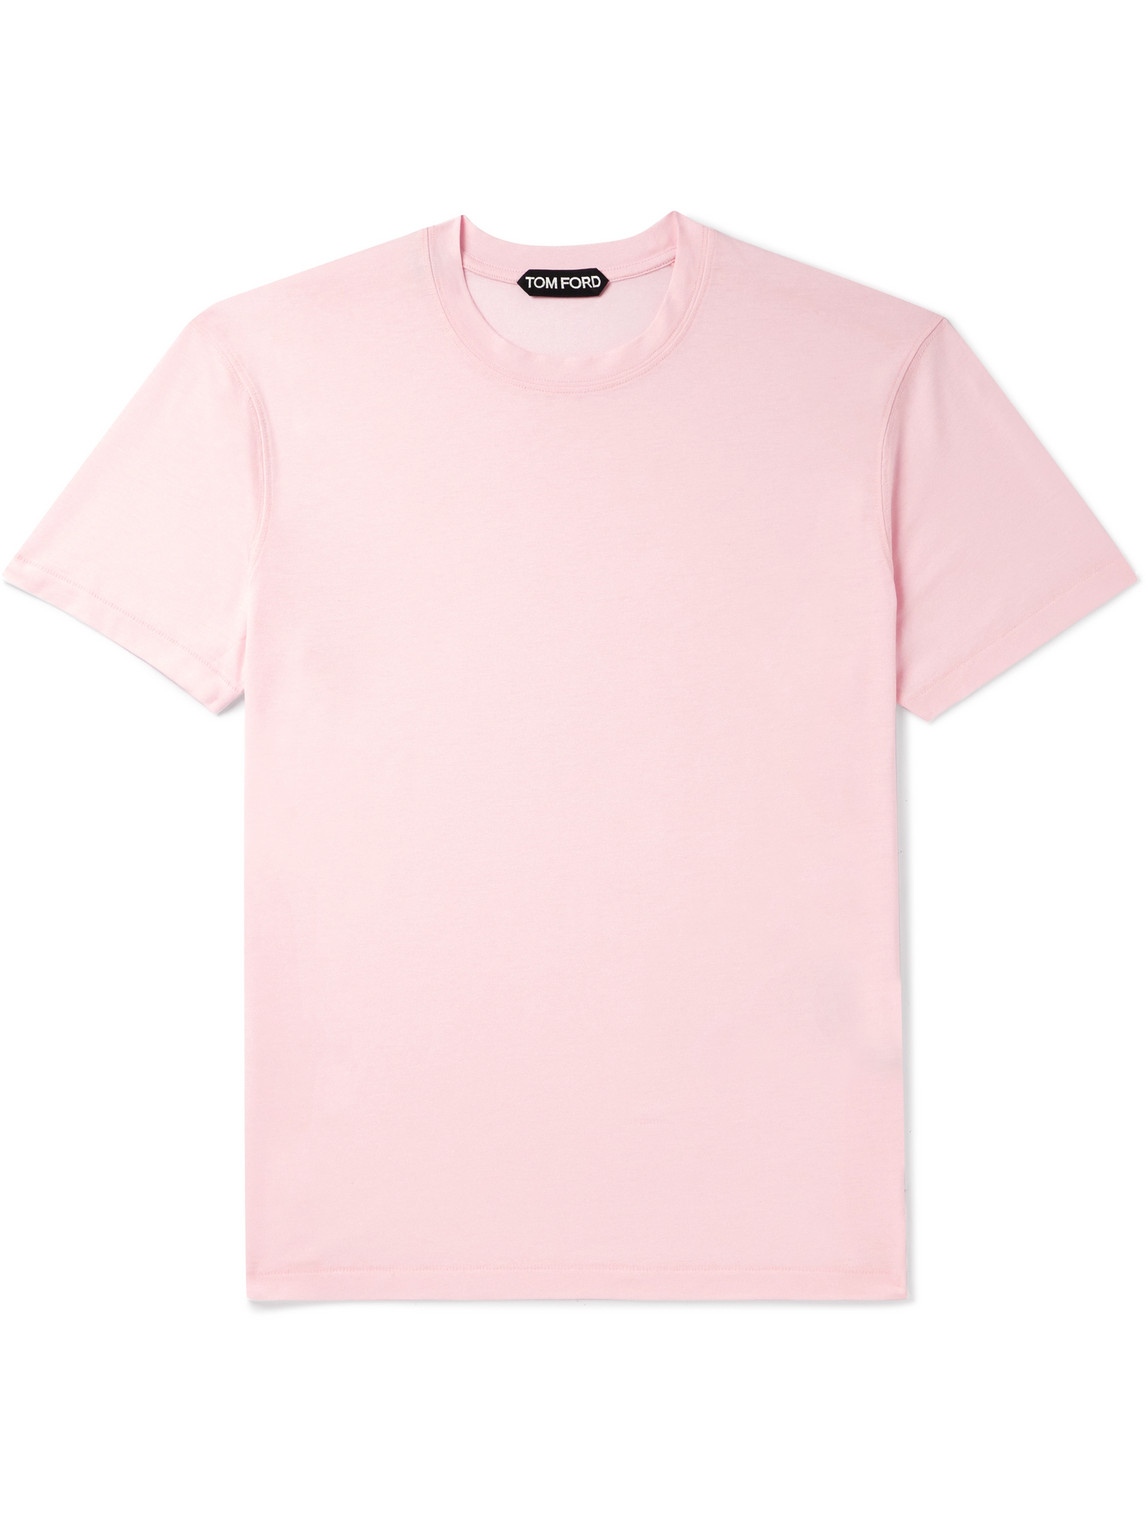 TOM FORD - Slim-Fit Lyocell and Cotton-Blend Jersey T-Shirt - Men - Pink - IT 48 von TOM FORD